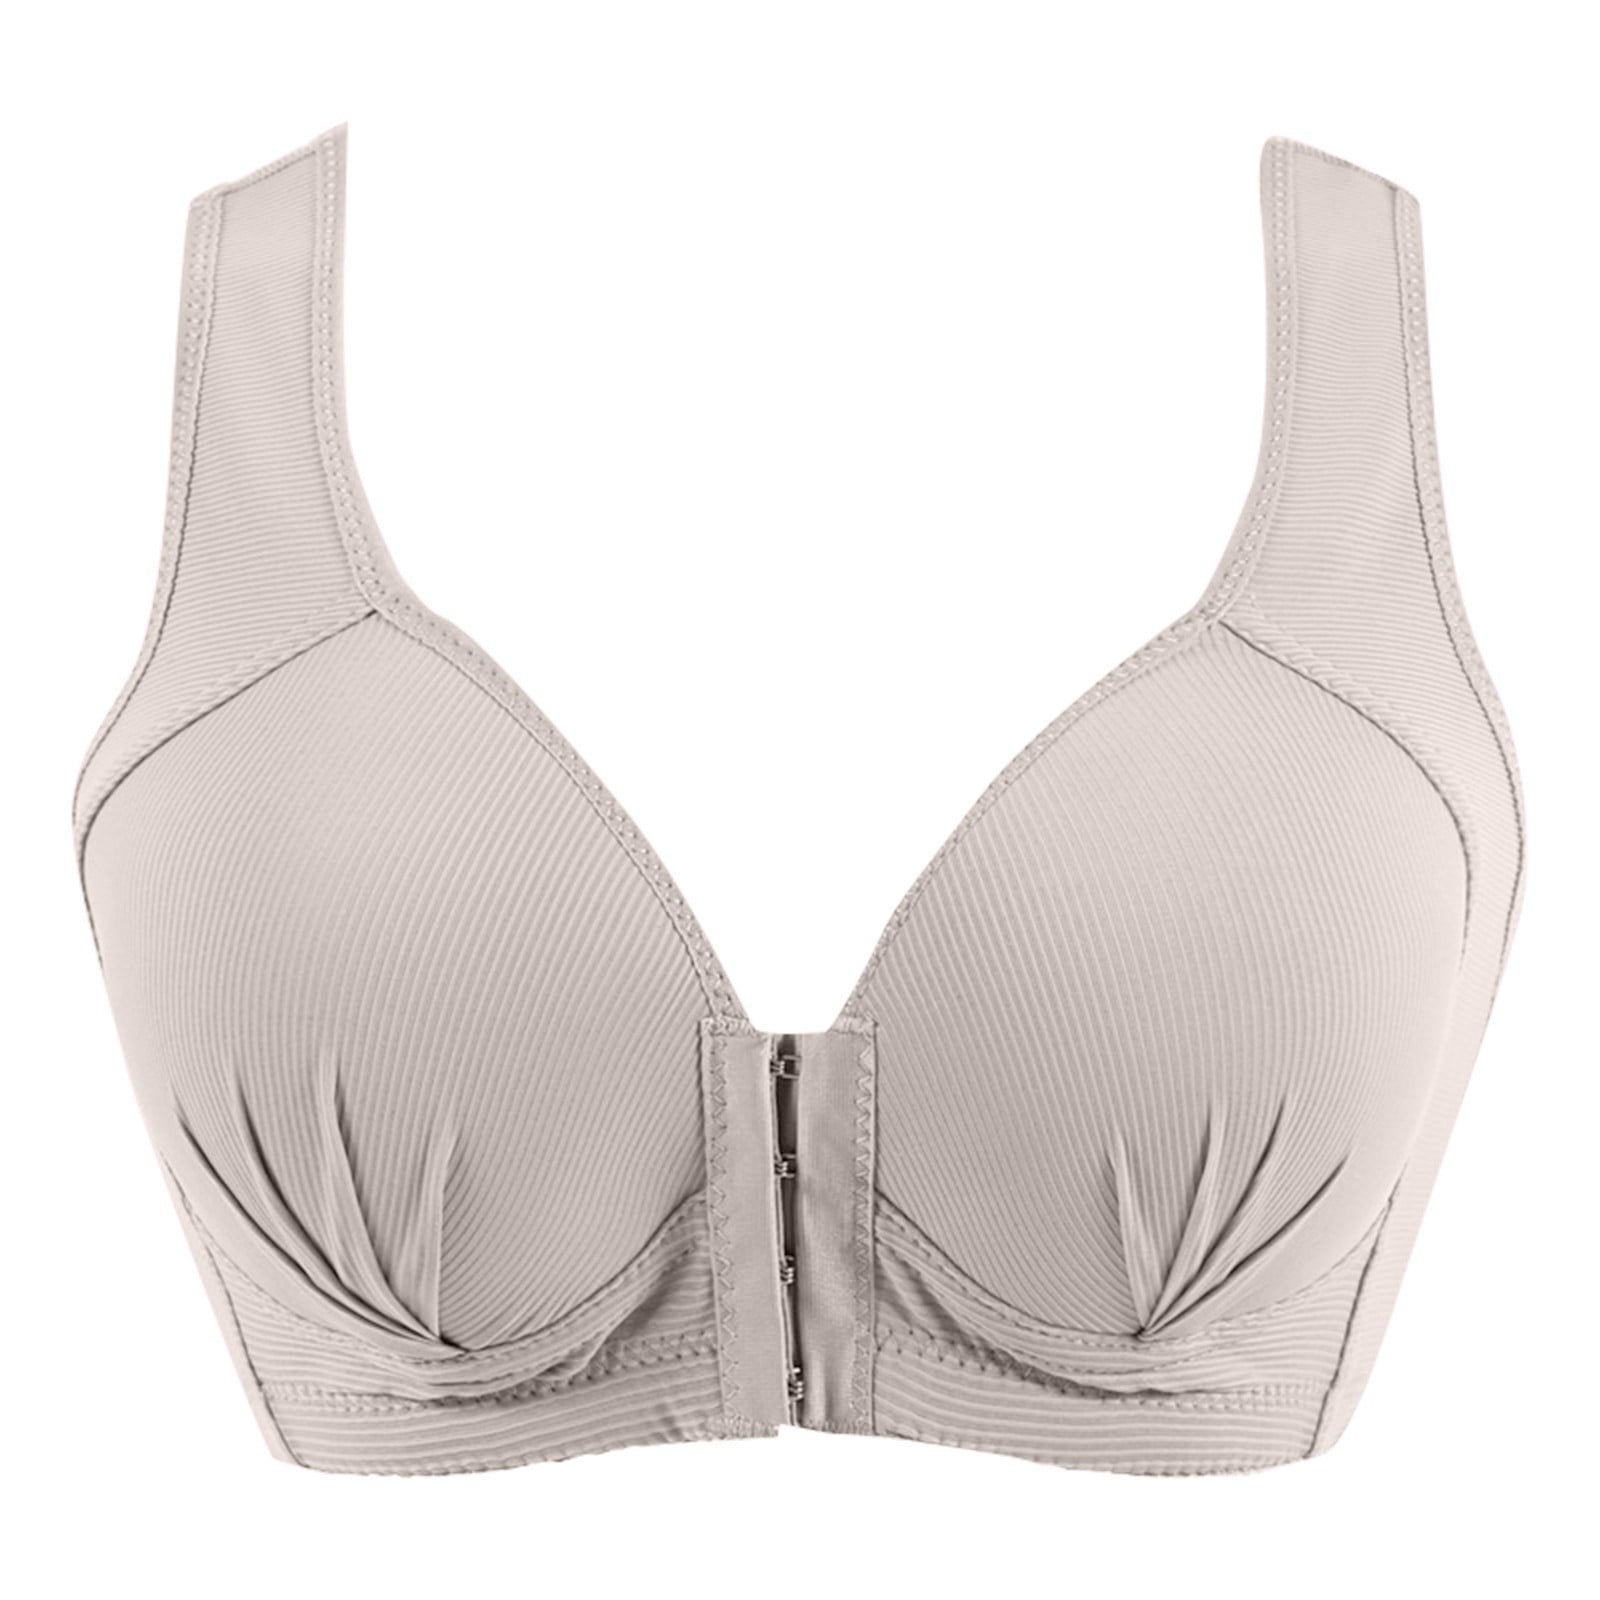 Knosfe Padded Bras for Women Front Closure Lingerie Full Coverage